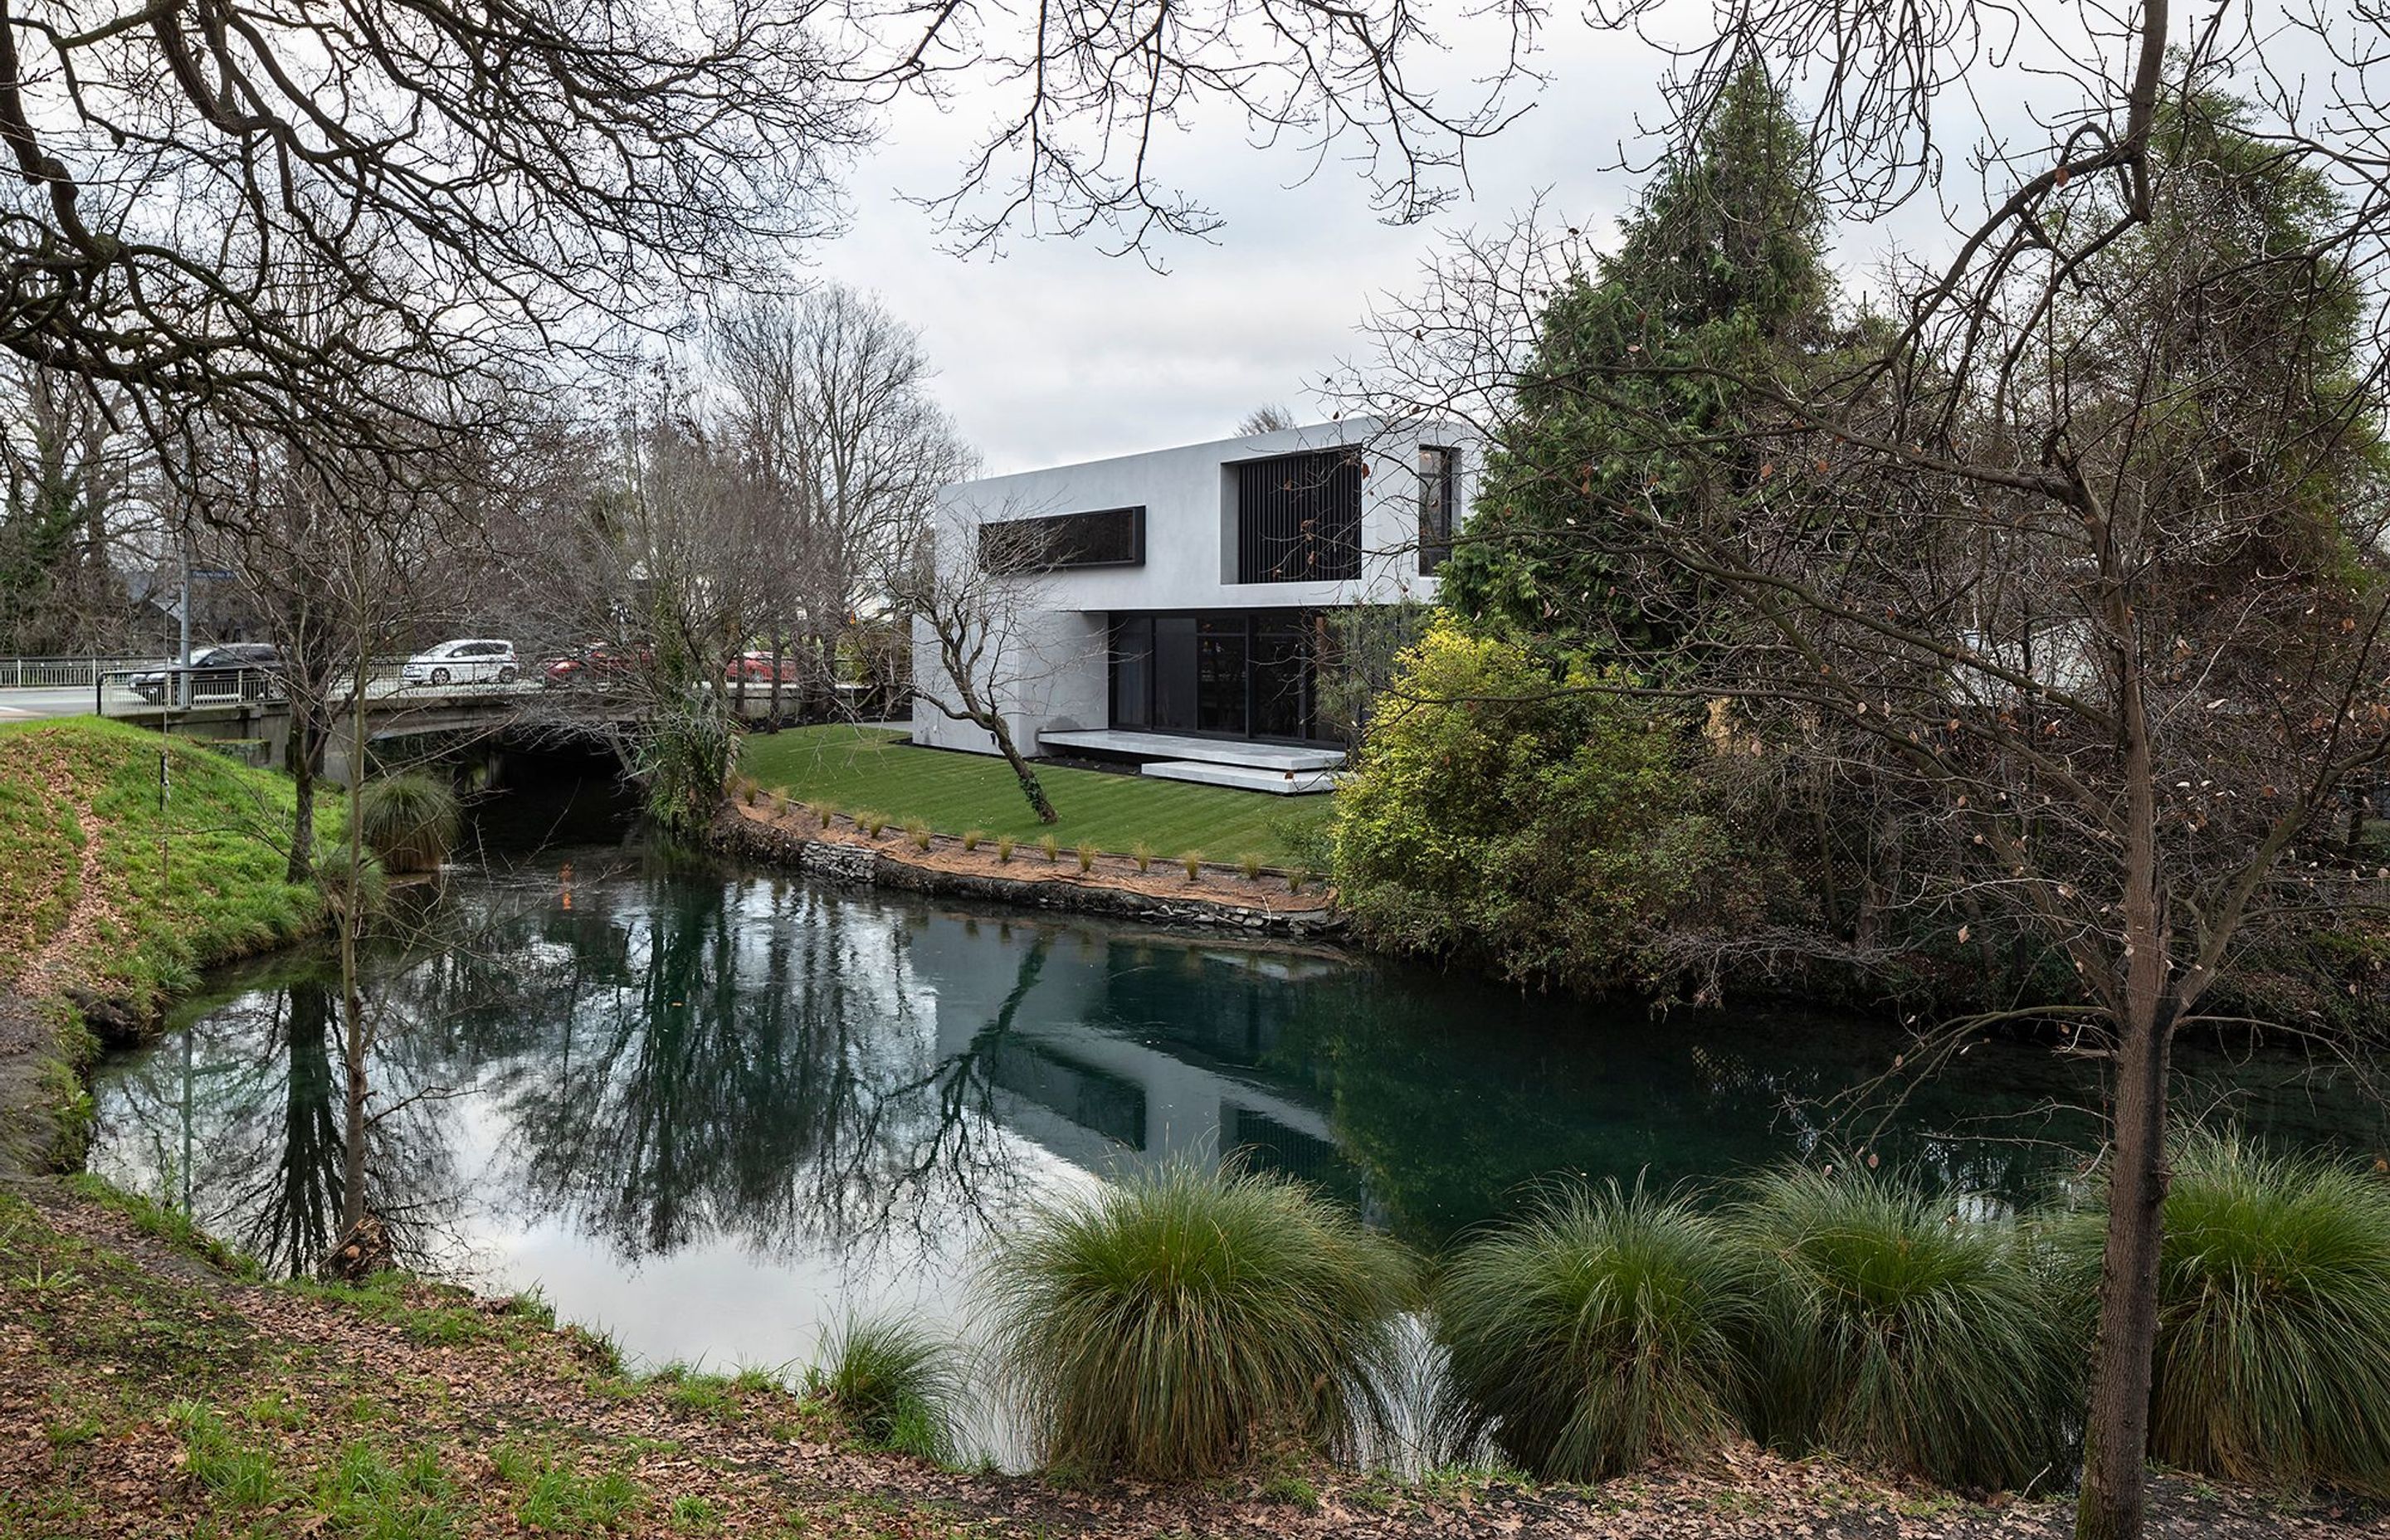 Located on a busy corner site on the fringe of Hagley Park, this house needed to embrace its riverside location while providing a high level of privacy for its owners.